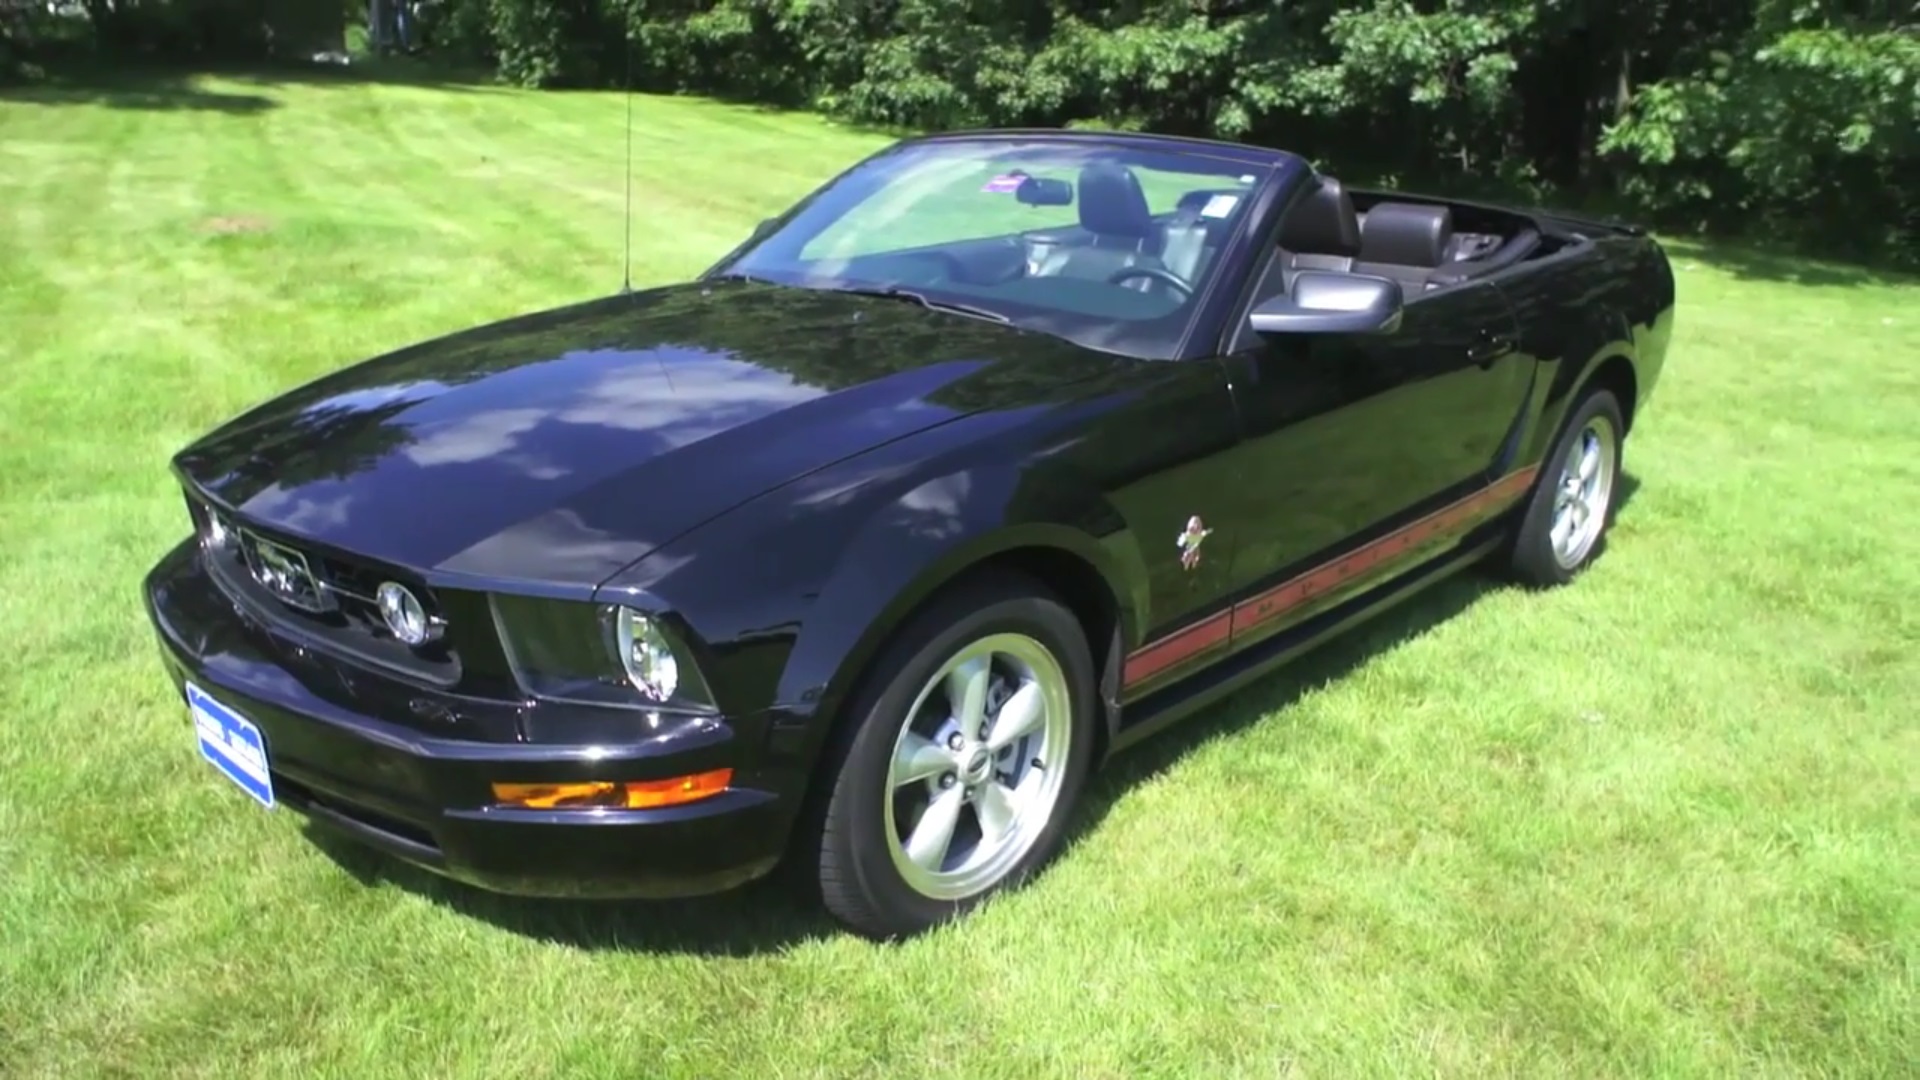 Video: 2008 Ford Mustang Warriors In Pink Quick Tour